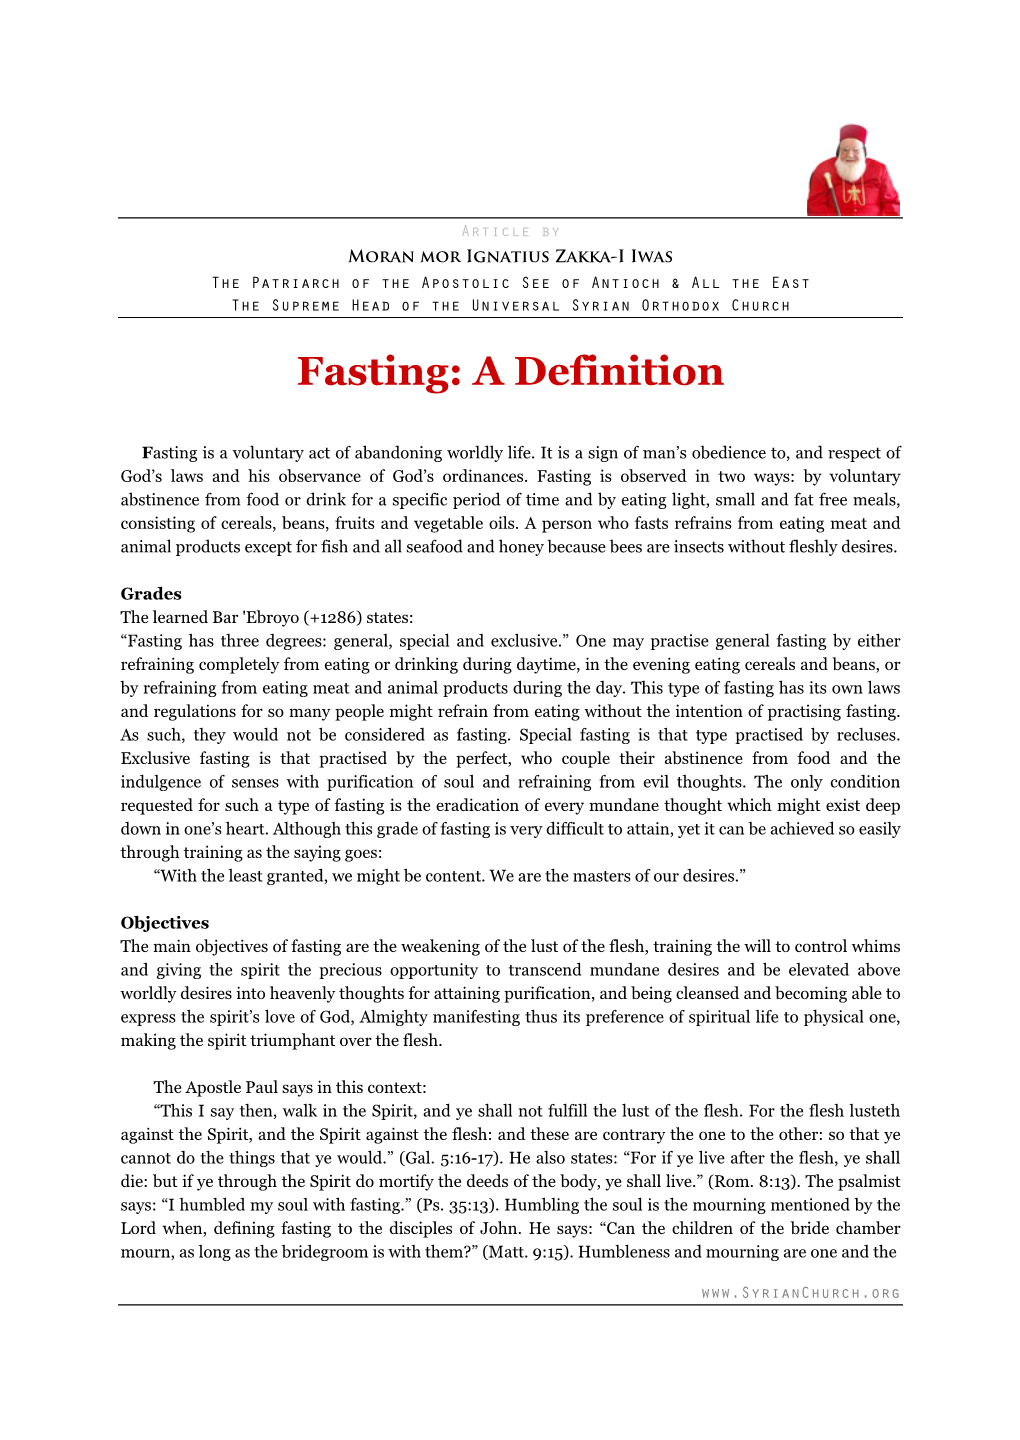 Fasting: a Definition